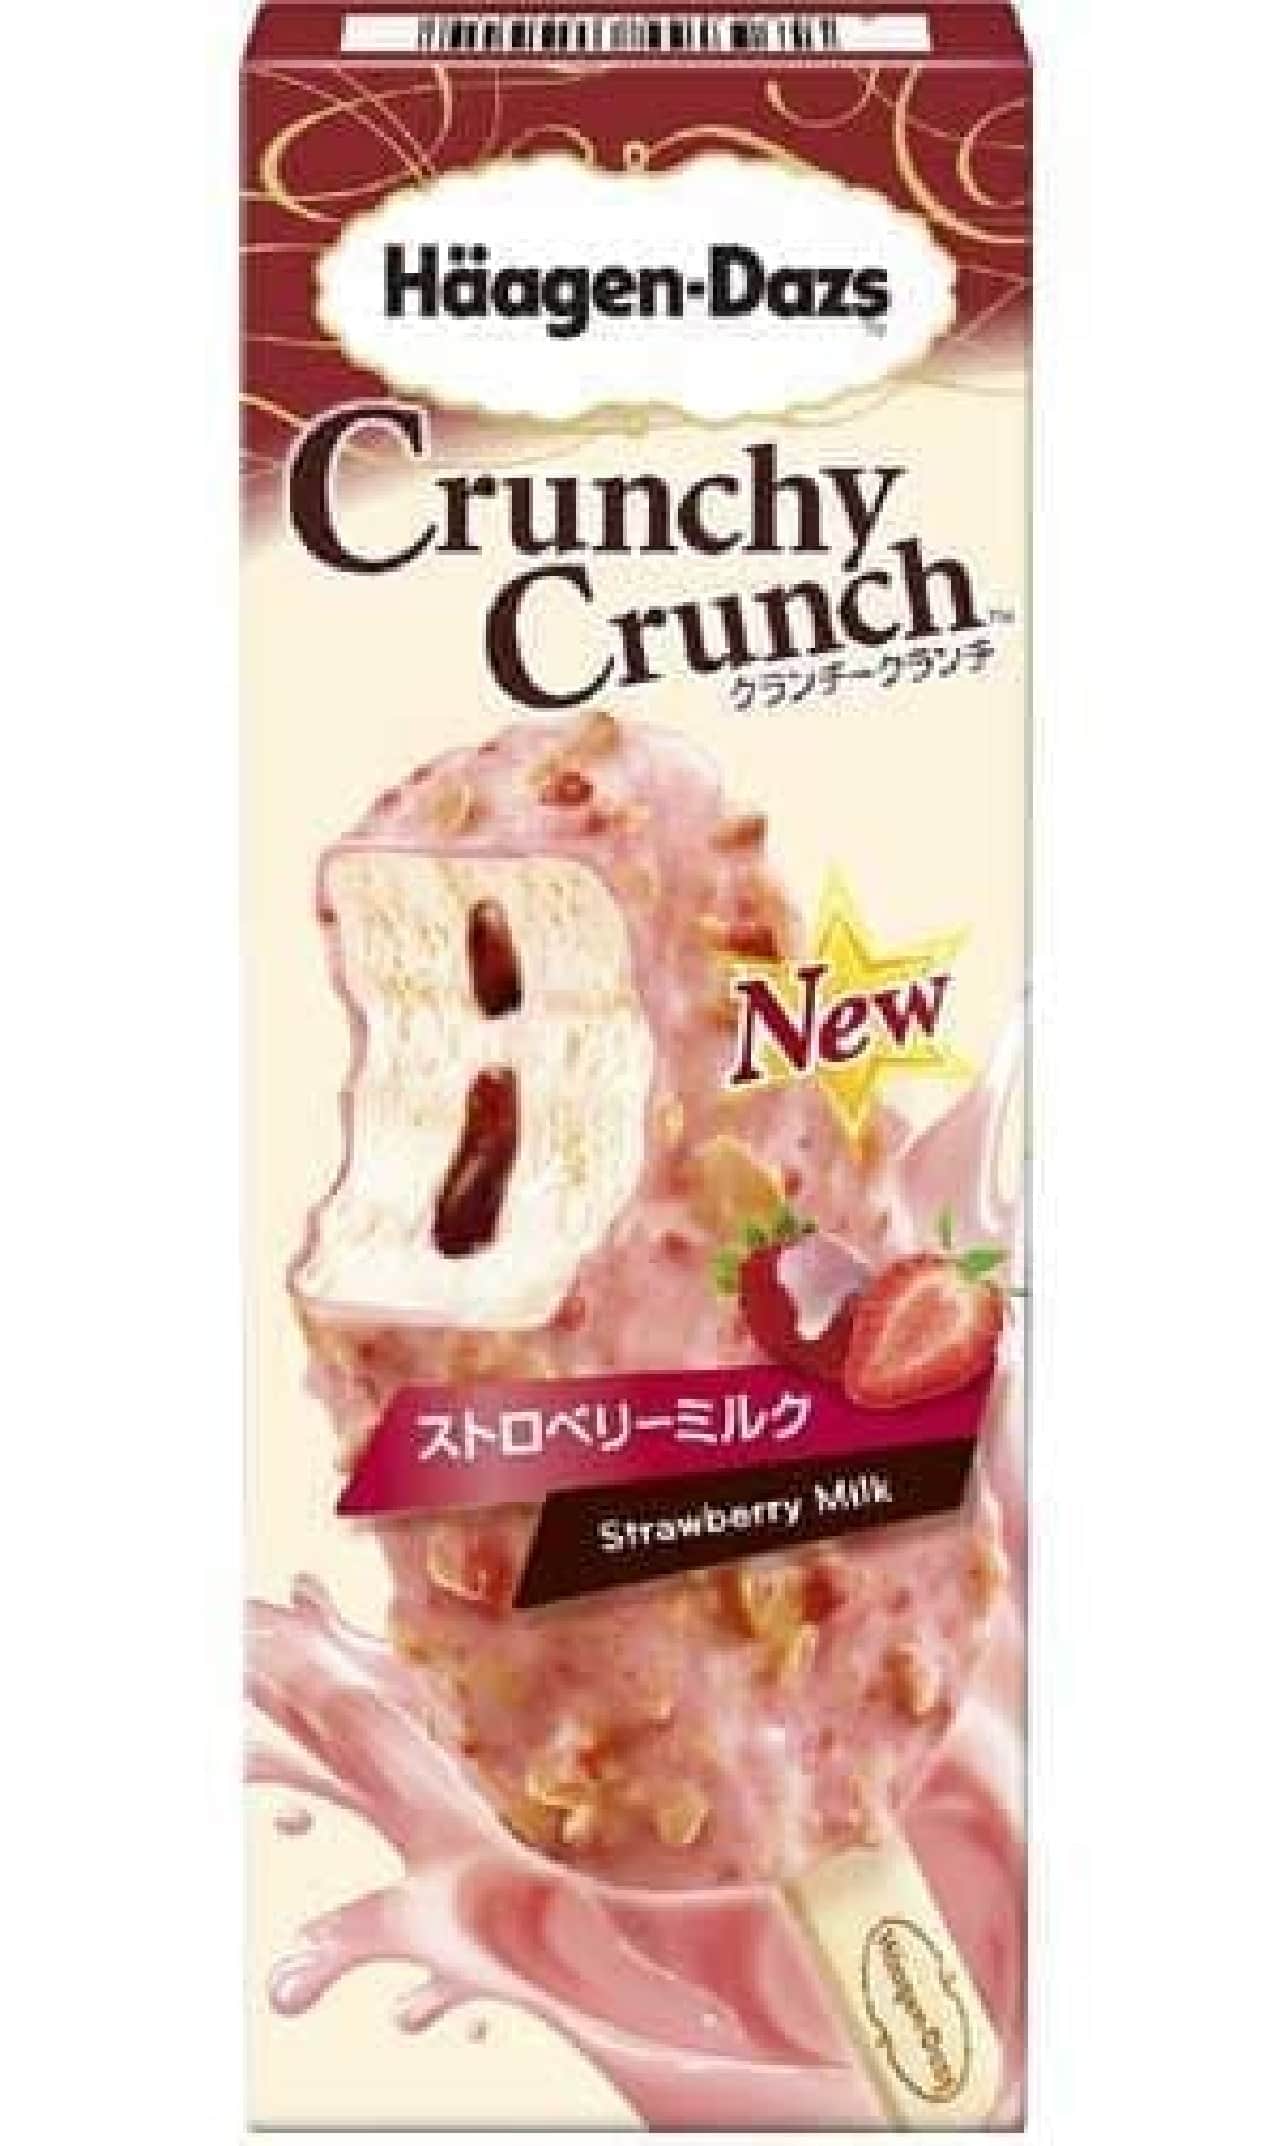 Although it has a crunchy texture, the inside is rich and creamy!